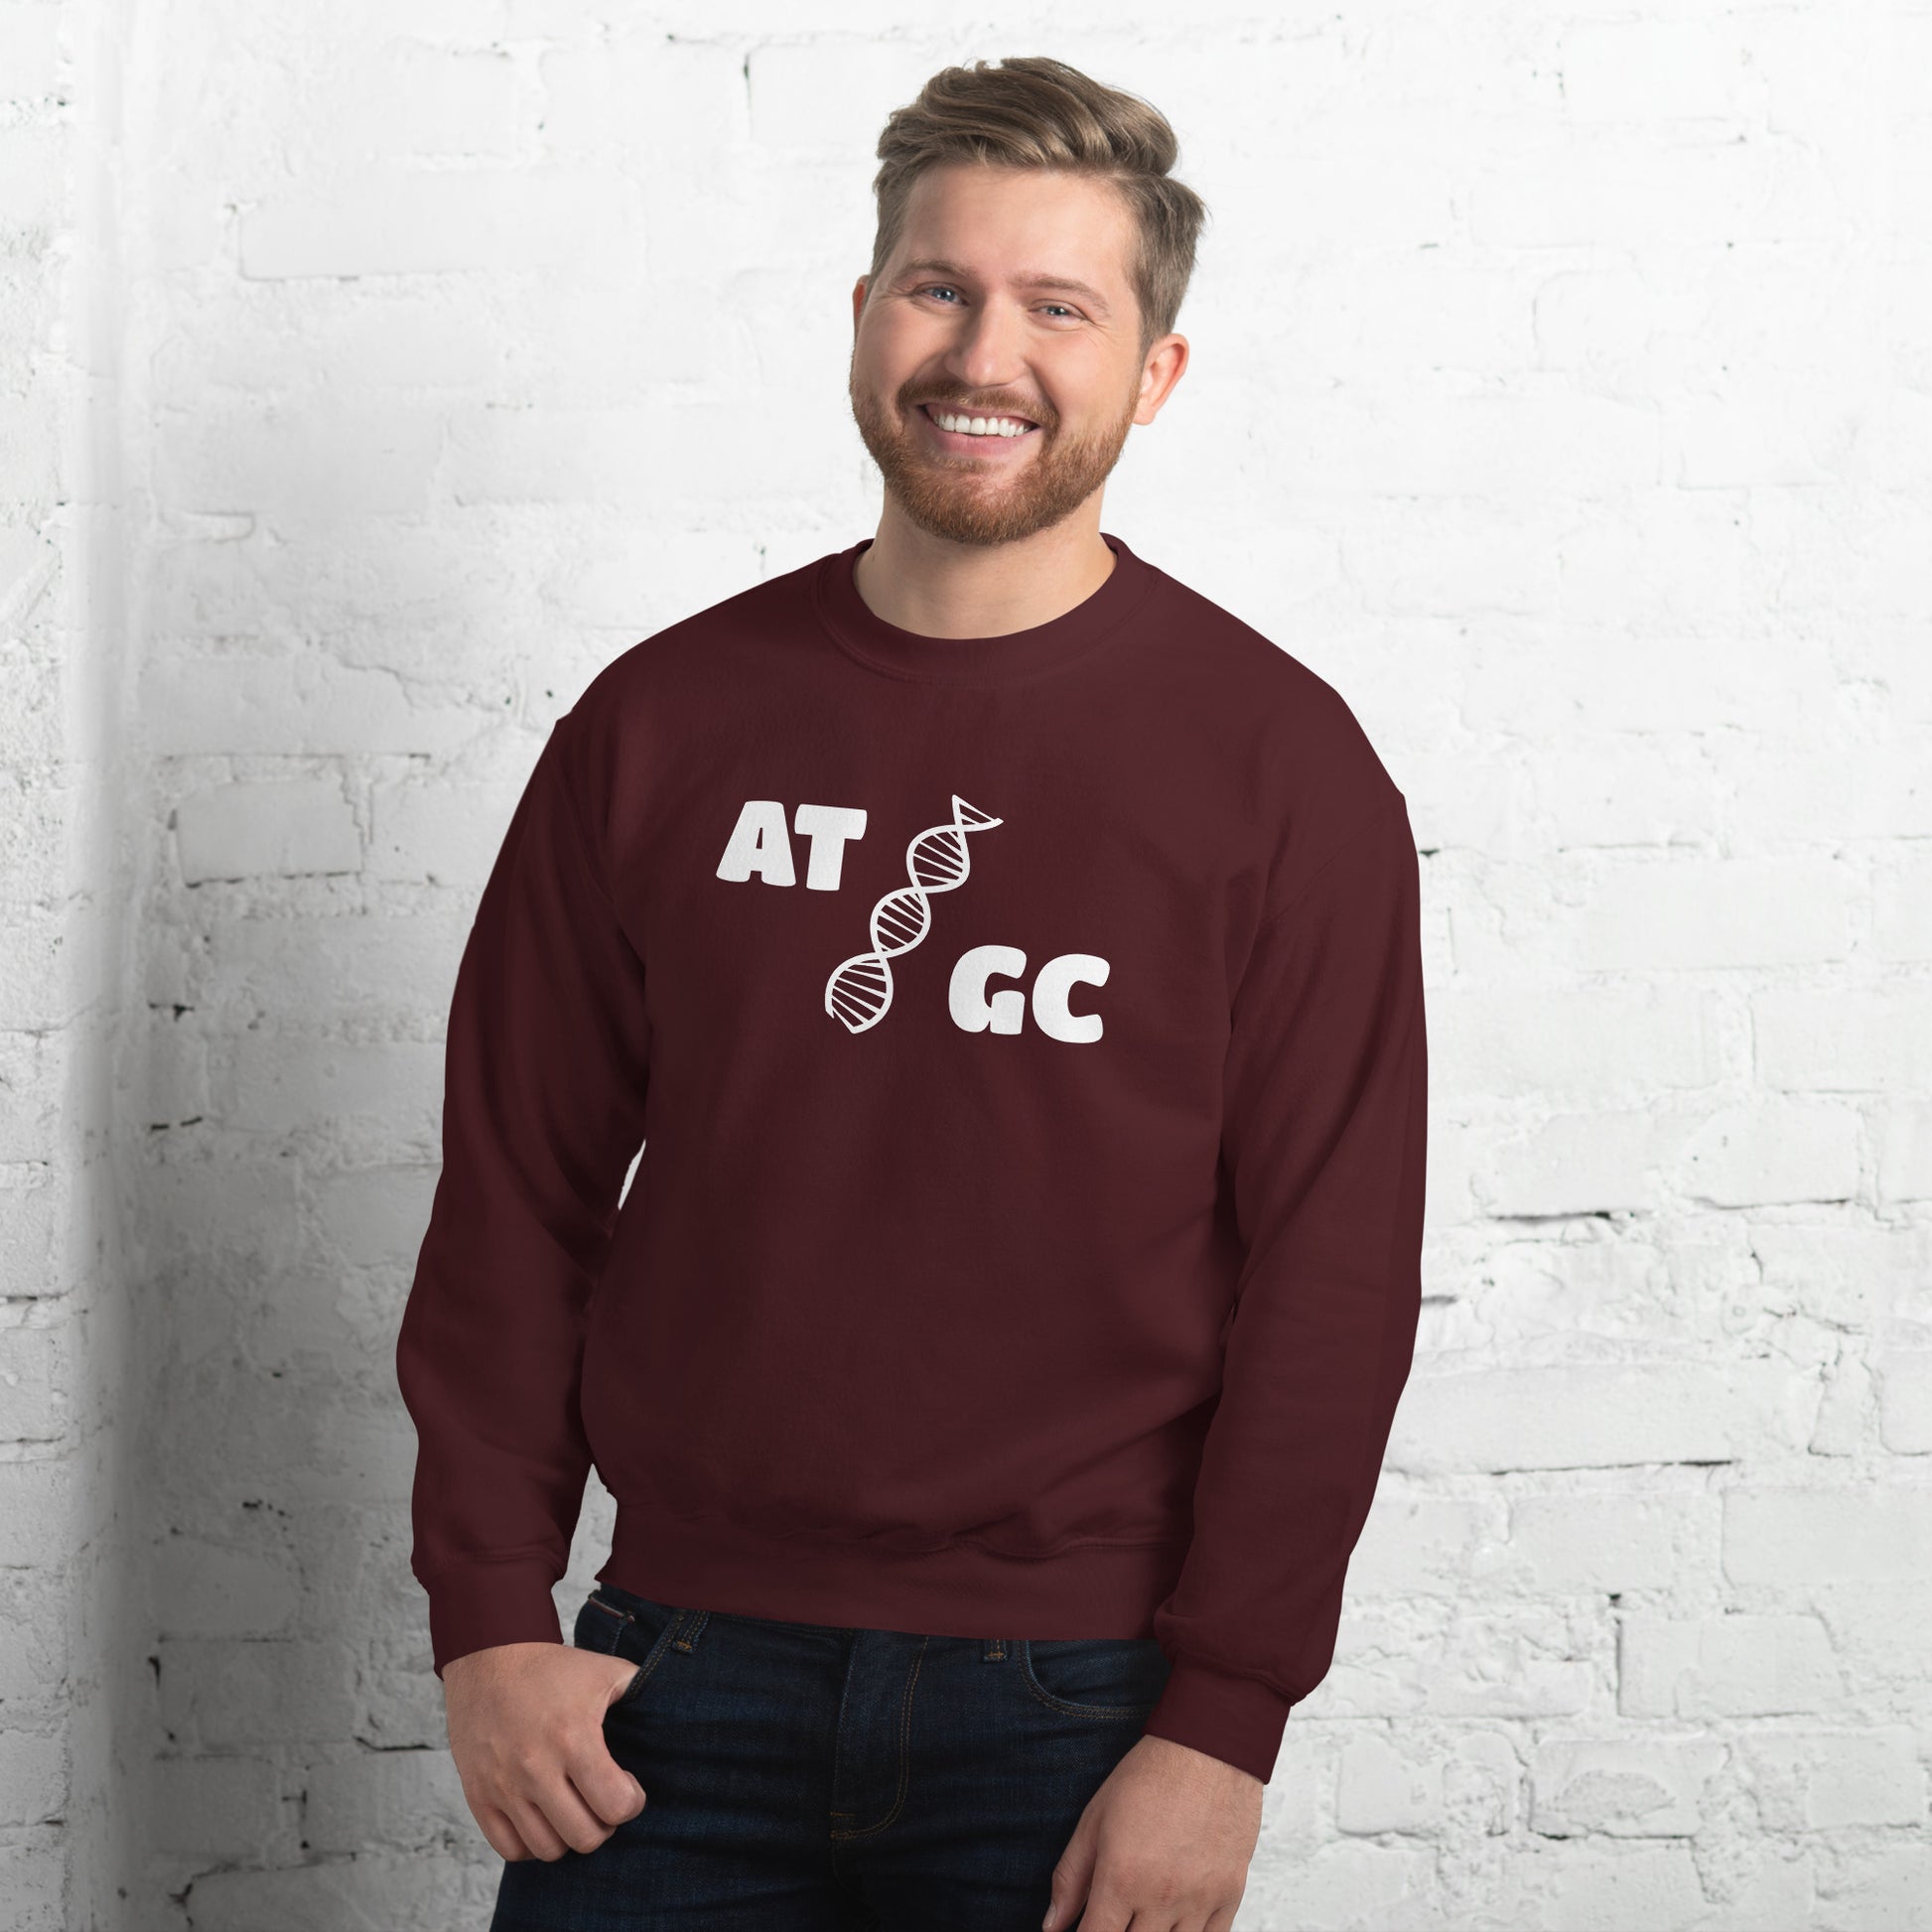 Men with maroon sweatshirt with image of a DNA string and the text "ATGC"